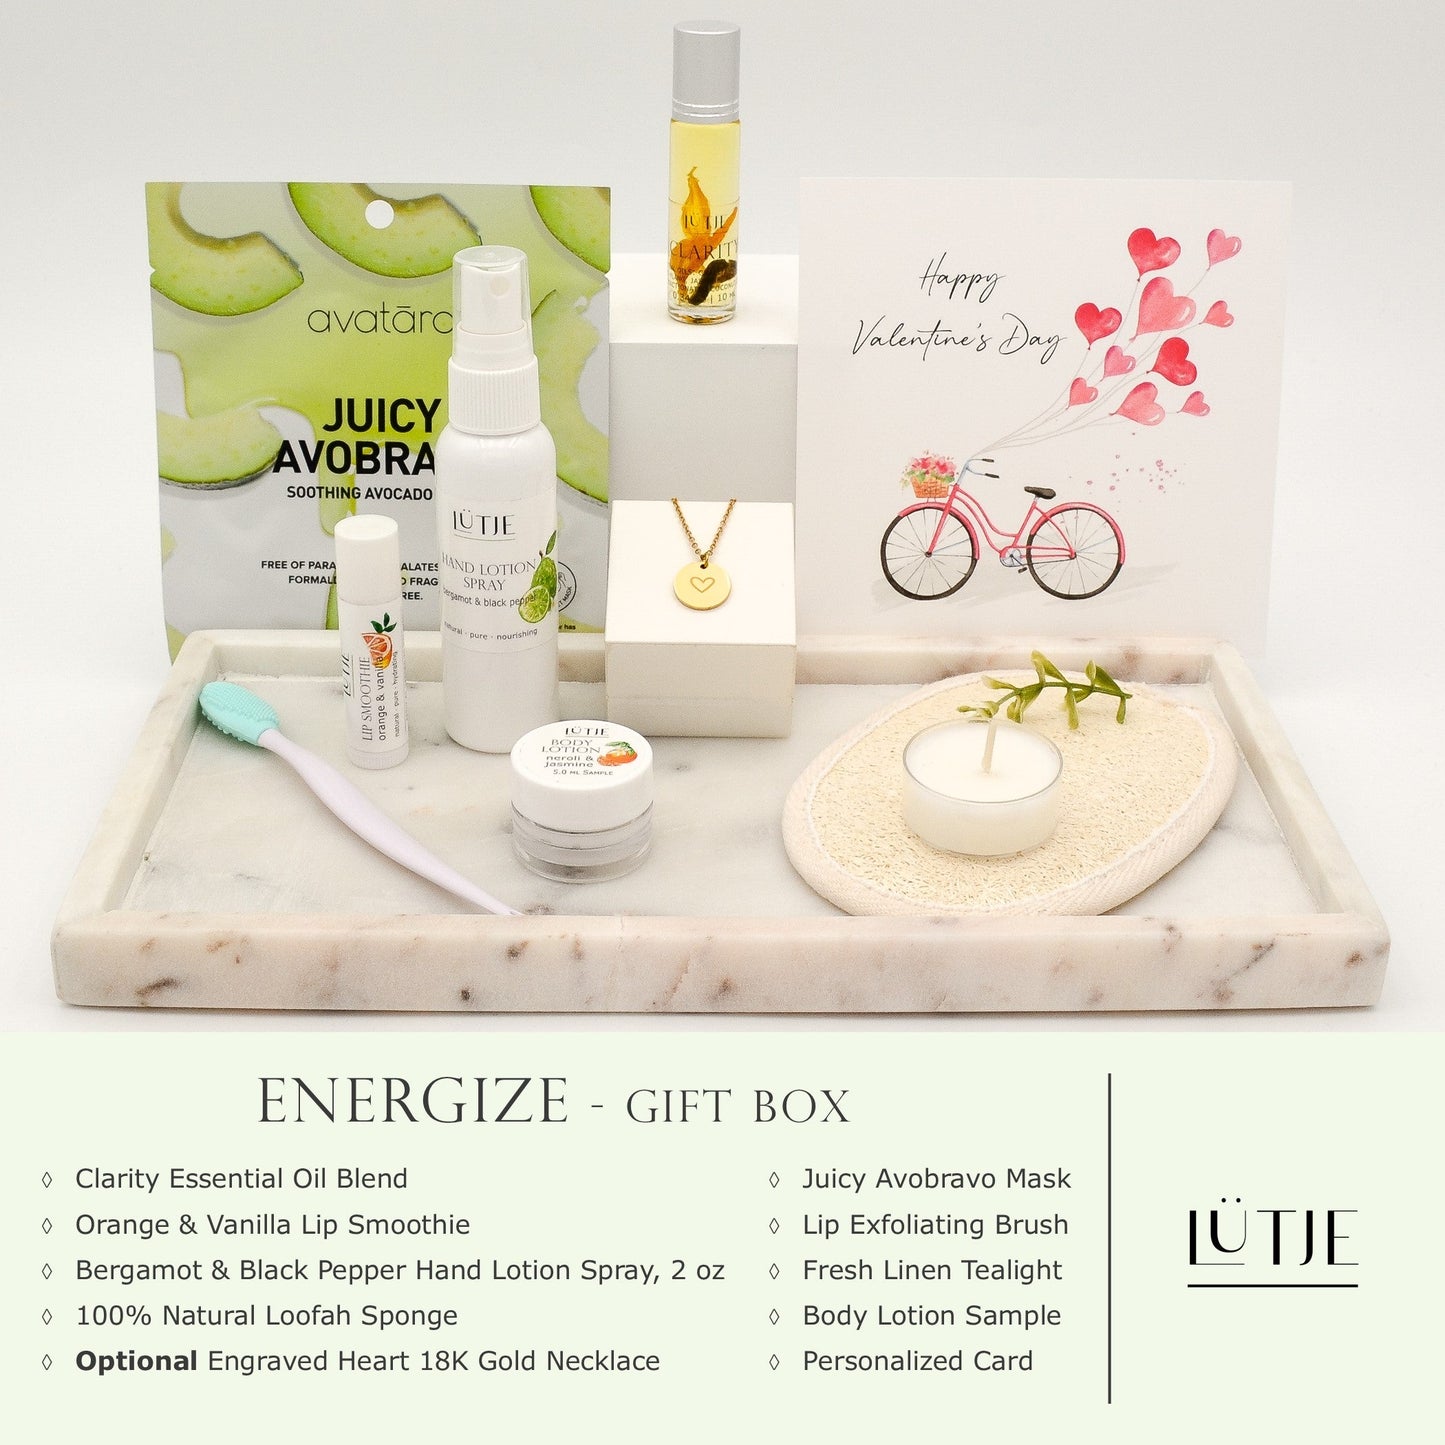 Energize Gift Box for women, BFF, wife, daughter, sister, mom, or grandma, includes Bergamot & Black Pepper hand lotion spray, essential oil, lip balm, hydrating face mask, other bath, spa and self-care items, and optional 18K gold-plated necklace with engraved heart.